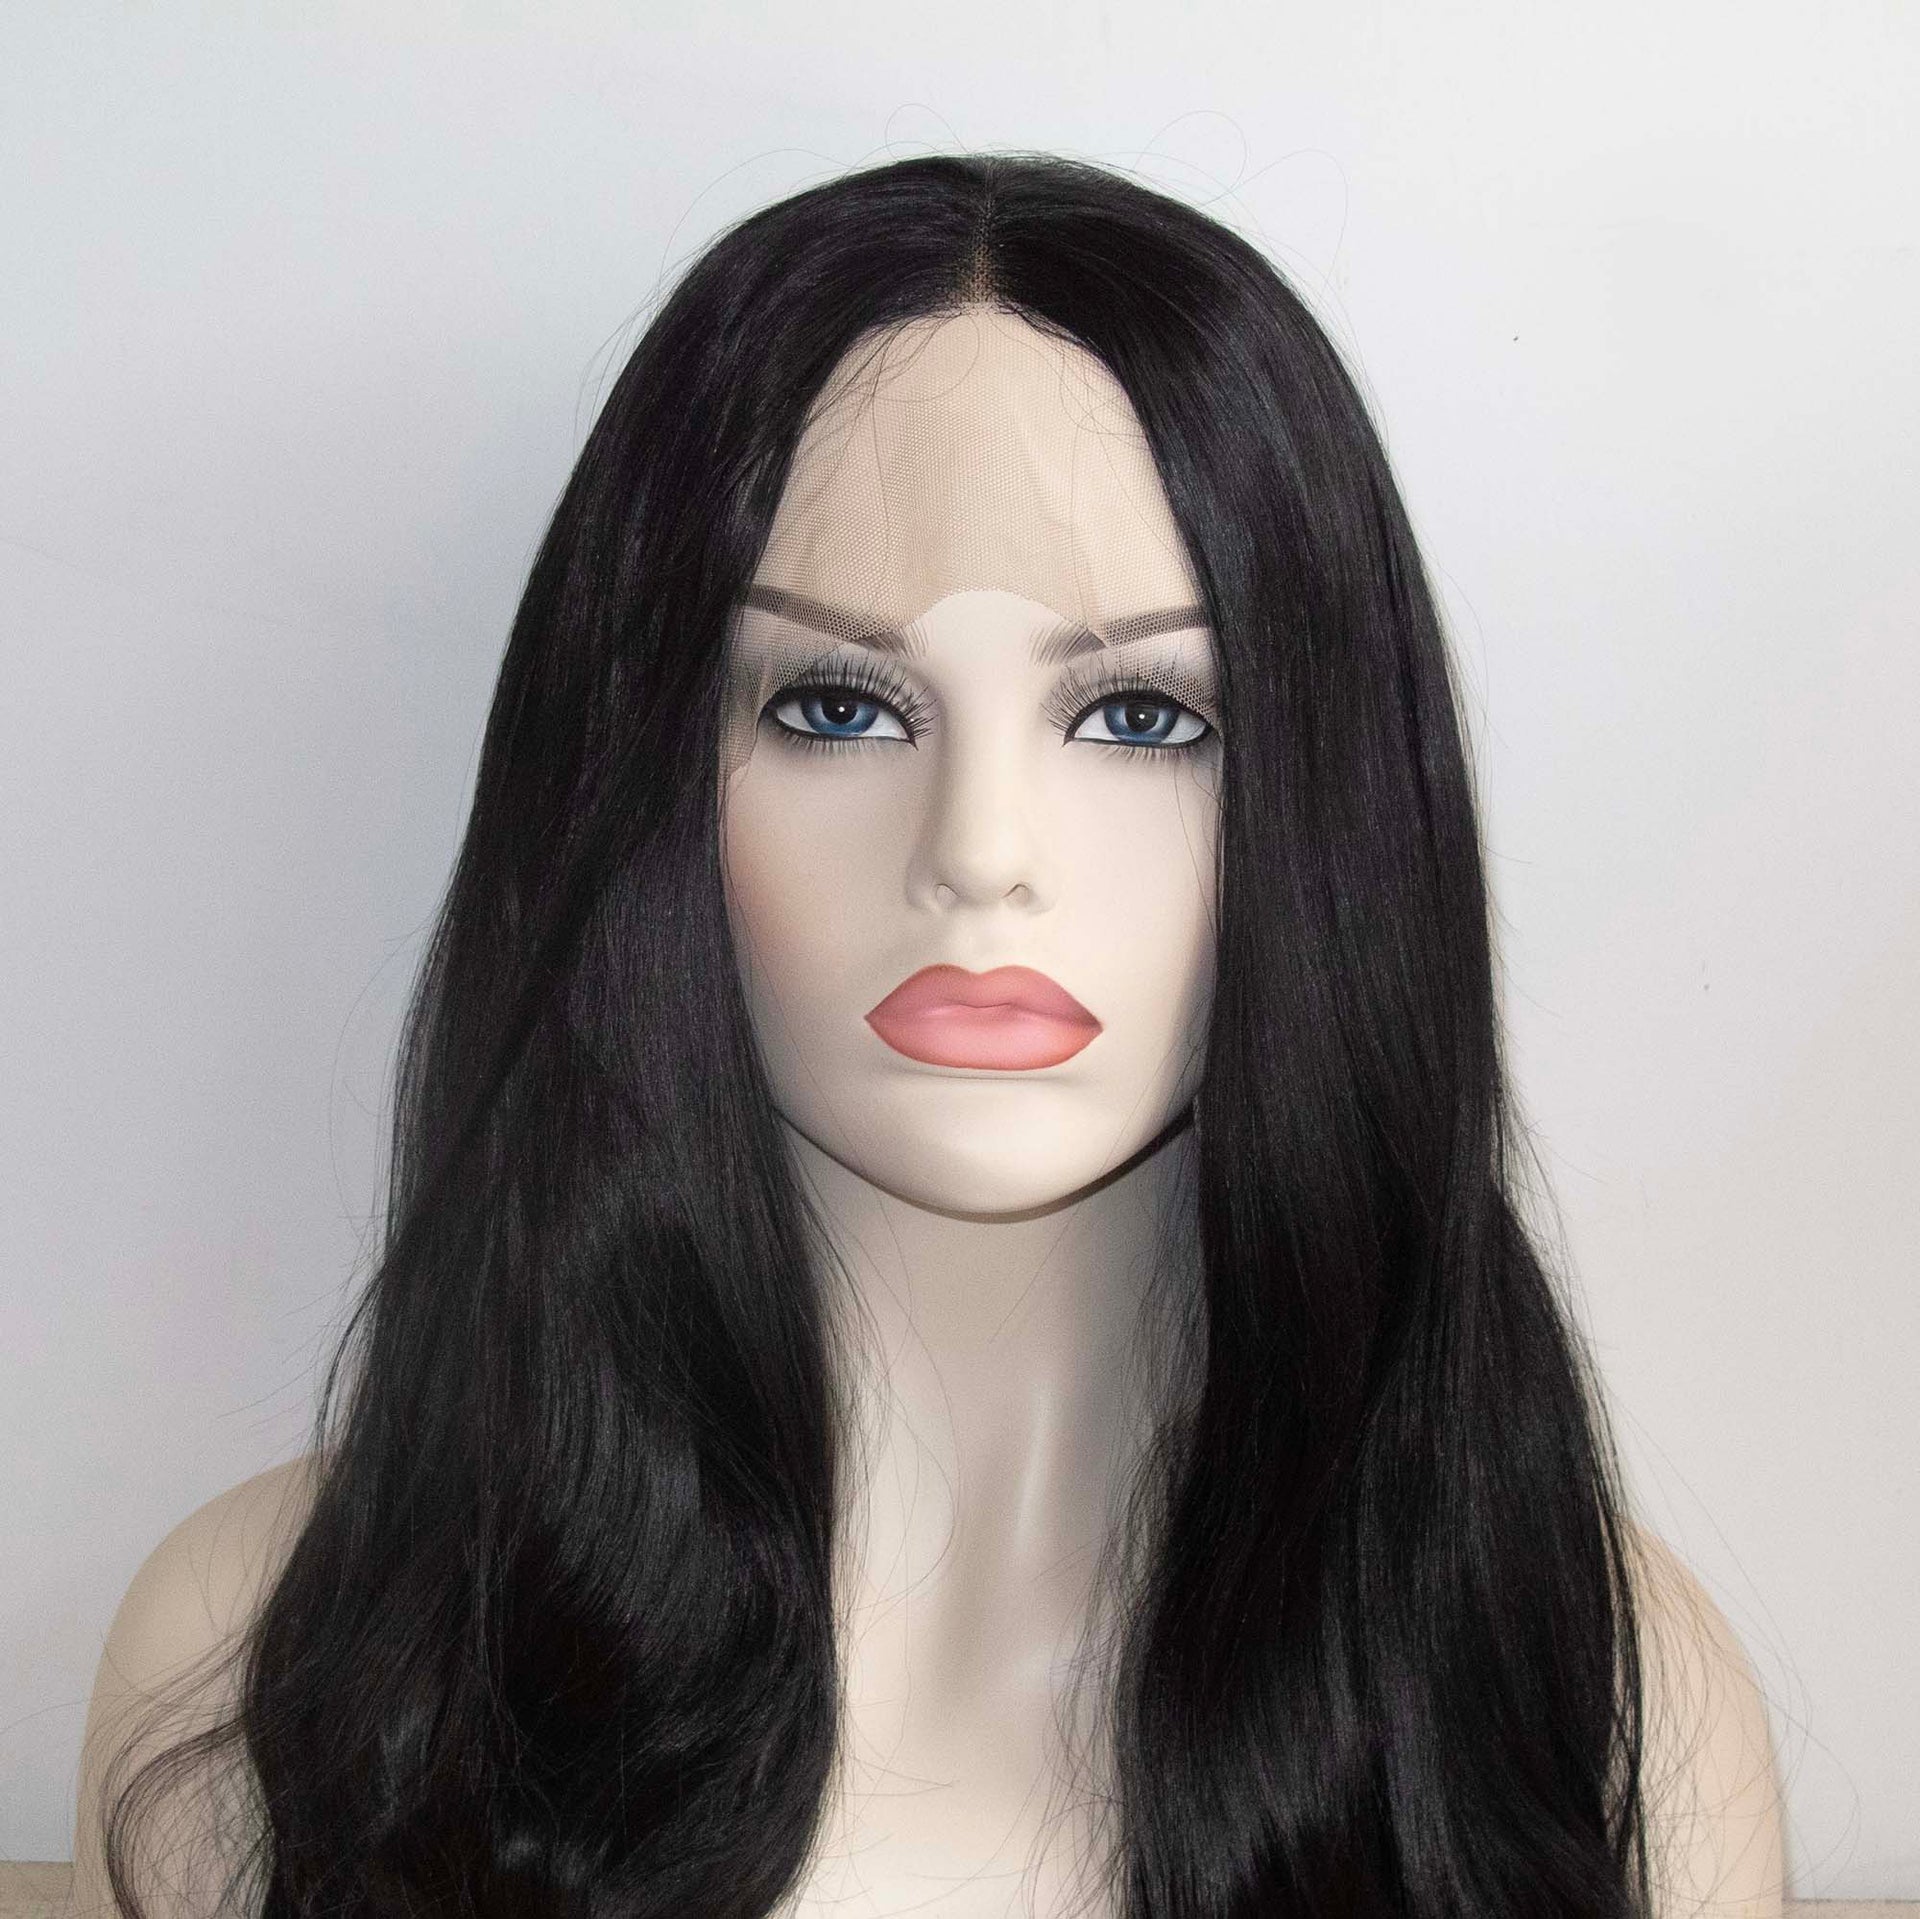 nevermindyrhead Women Black Lace Front Long Wavy Hair Thick Middle Part Wig 24 Inches